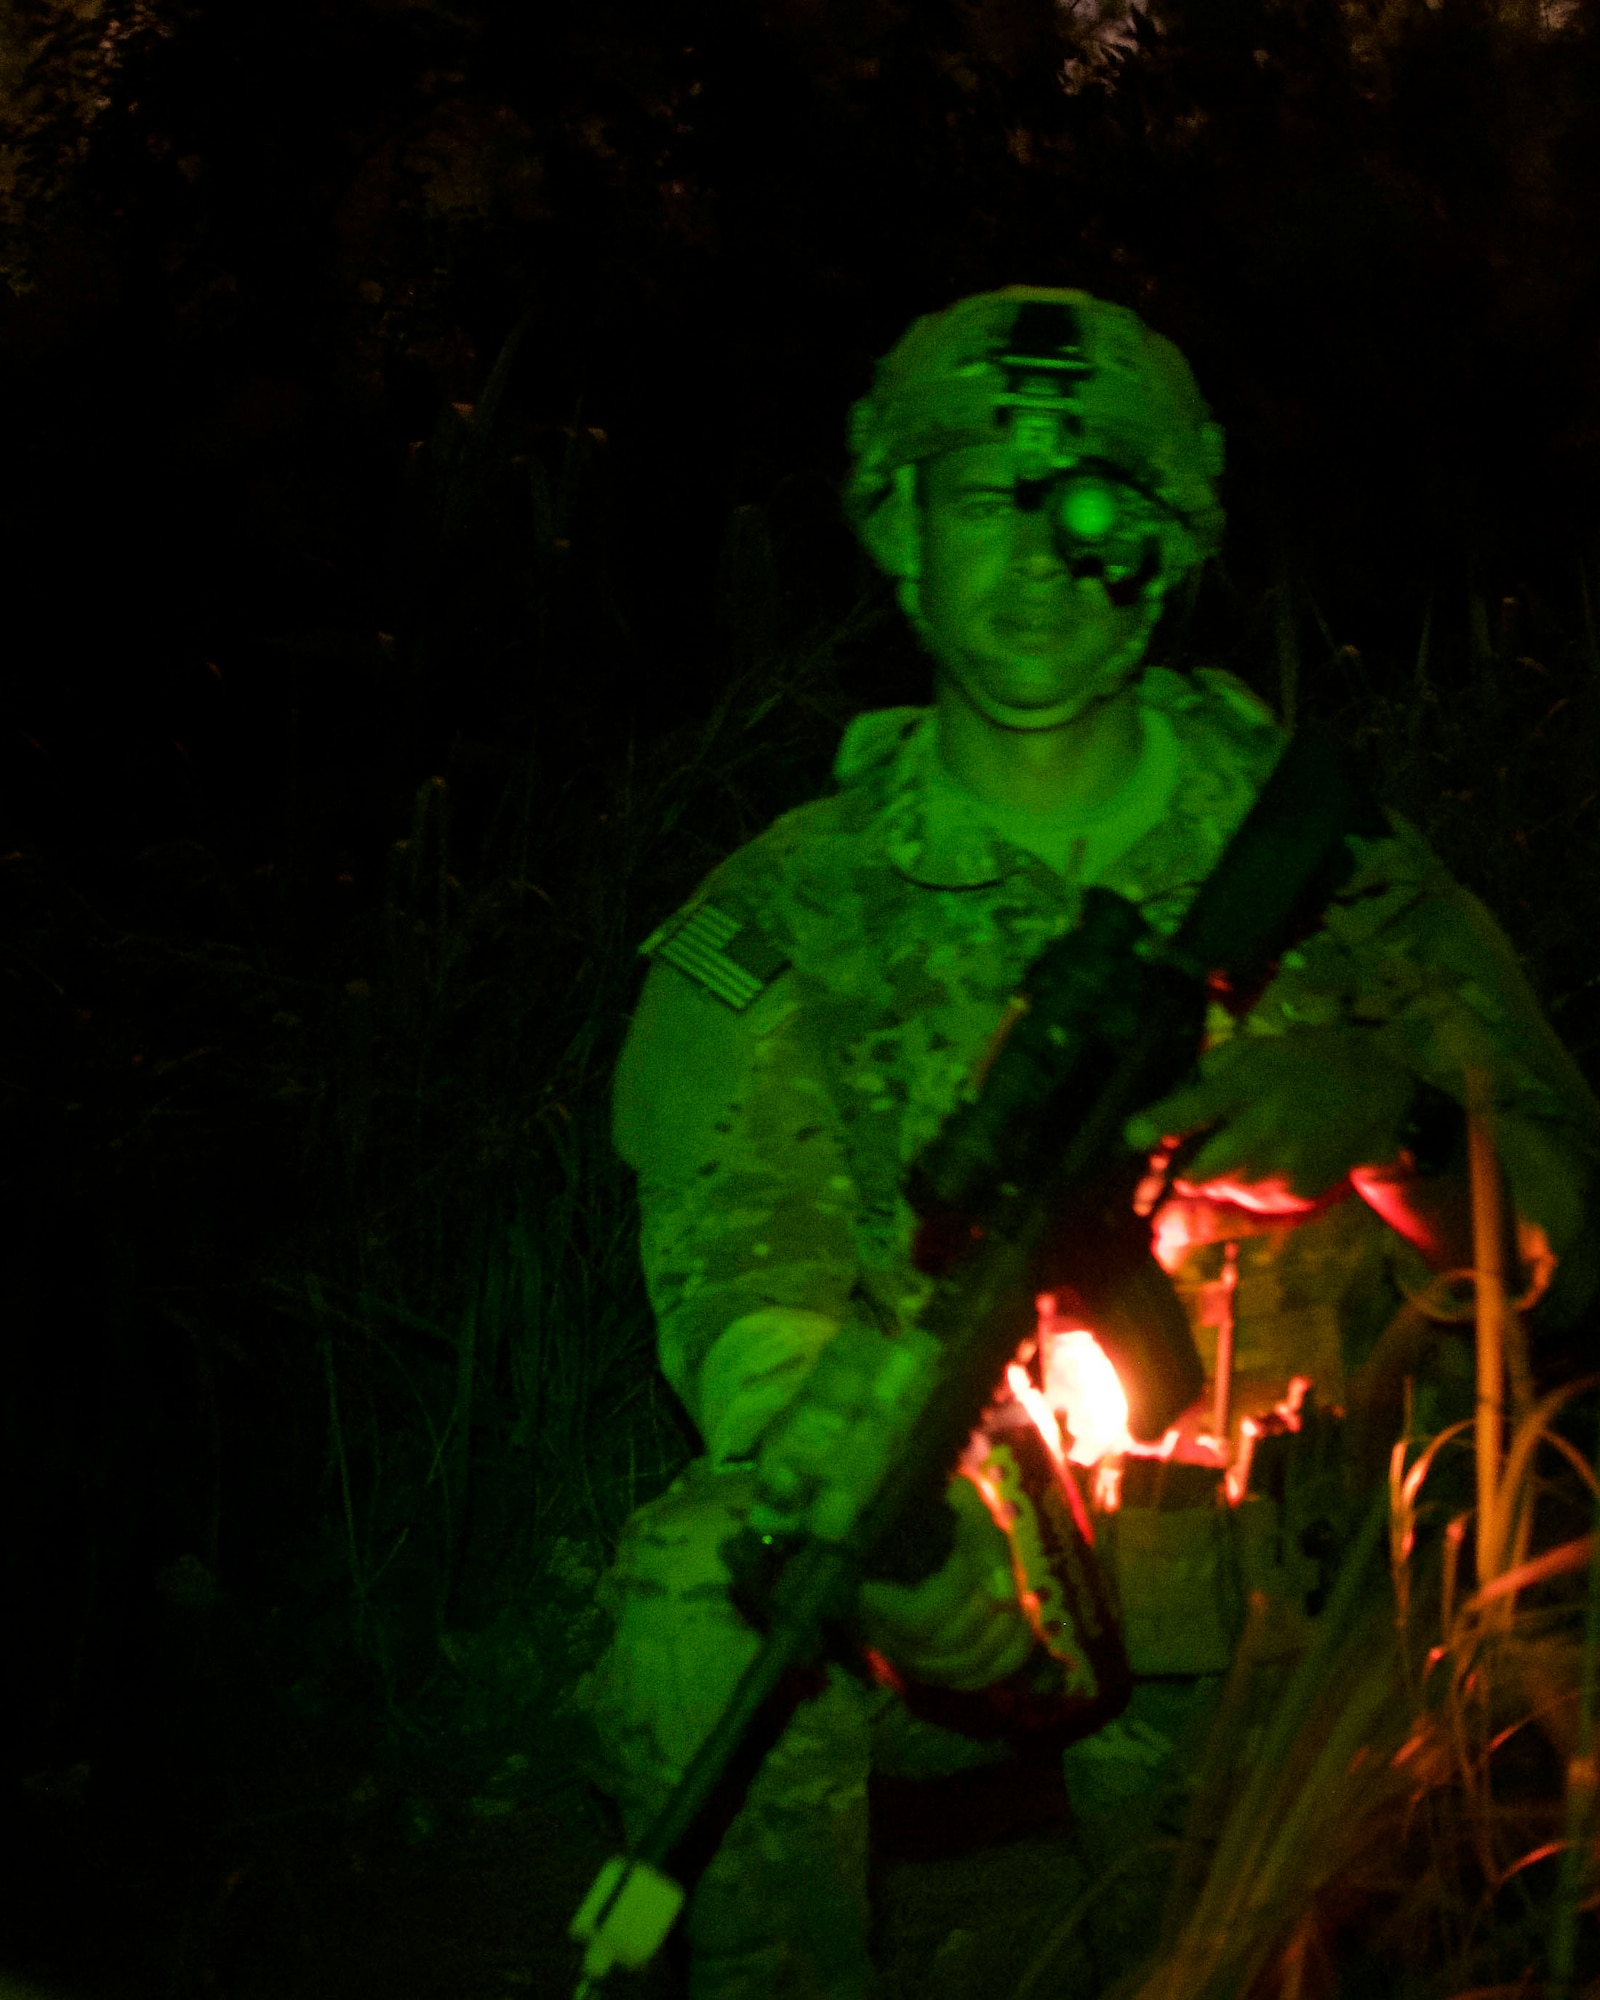 Staff Sgt. Miguel Hill, 482nd Civil Engineering Squadron Explosive Ordnance Disposal Flight team member, performs rear guard duty during night operations at Homestead Air Reserve Base, Fla., April 8. The EOD Flight conducted dismounted counter-IED operations as part of a weeklong training exercise aimed to prepare the reservists for combat operations. (U.S. Air Force photo by Staff Sgt. Jaimi L. Upthegrove)